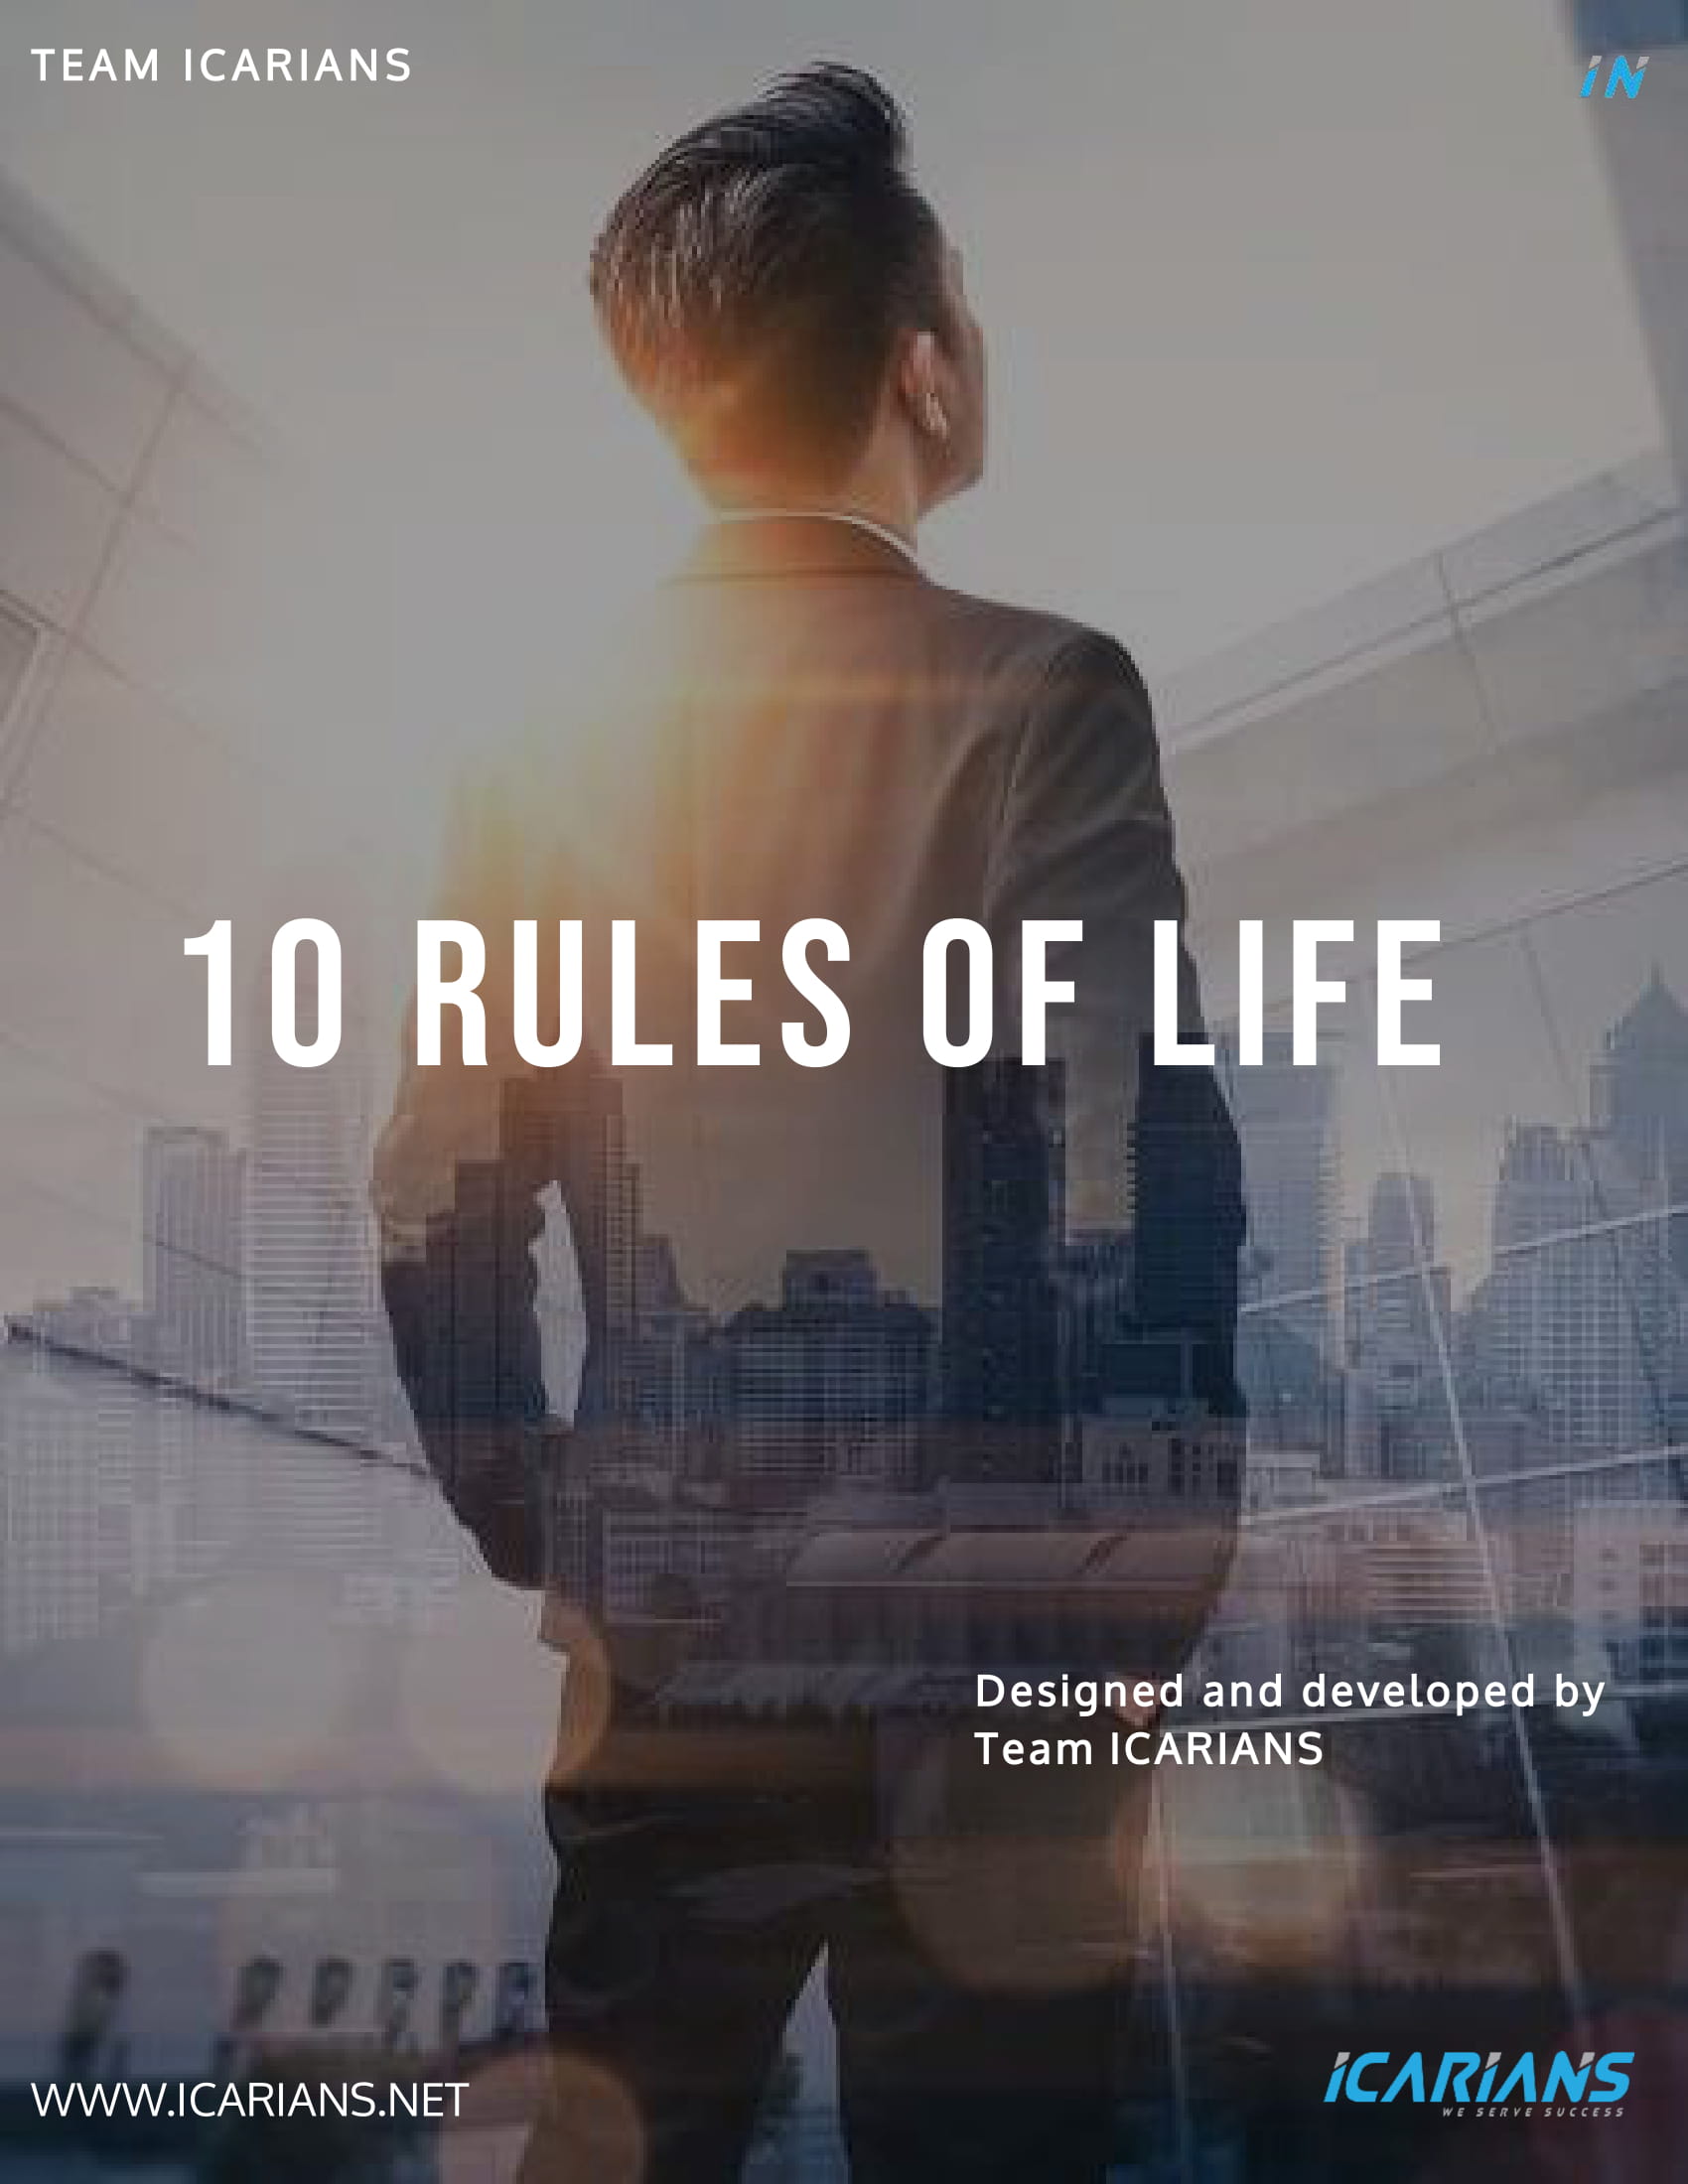 10 RULES OF LIFE